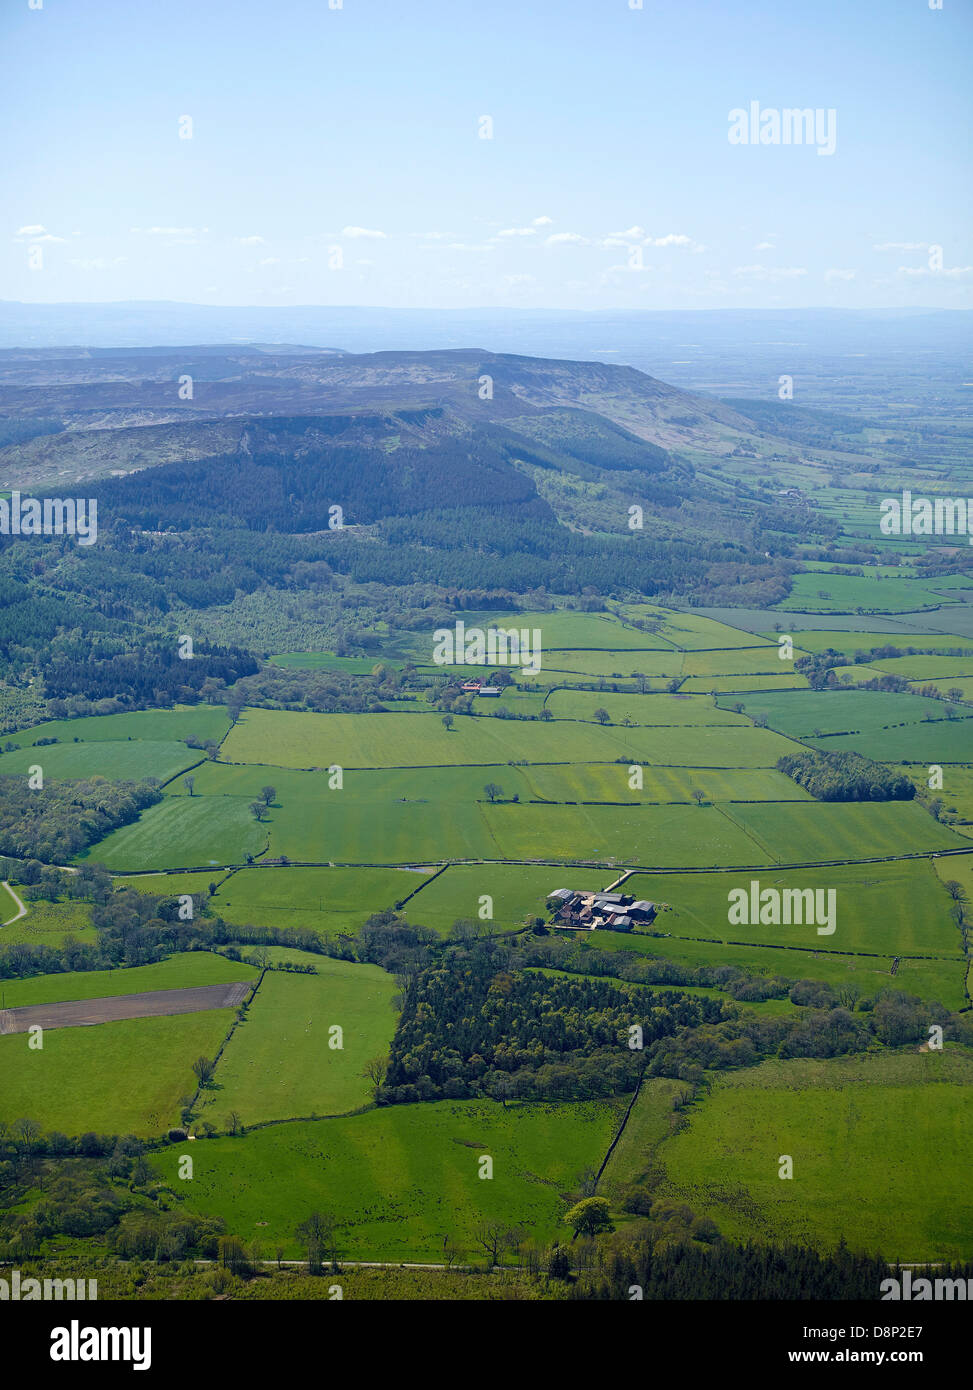 Looking East to West along the northern edge of the North Yorks Moors with Cleveland below Stock Photo